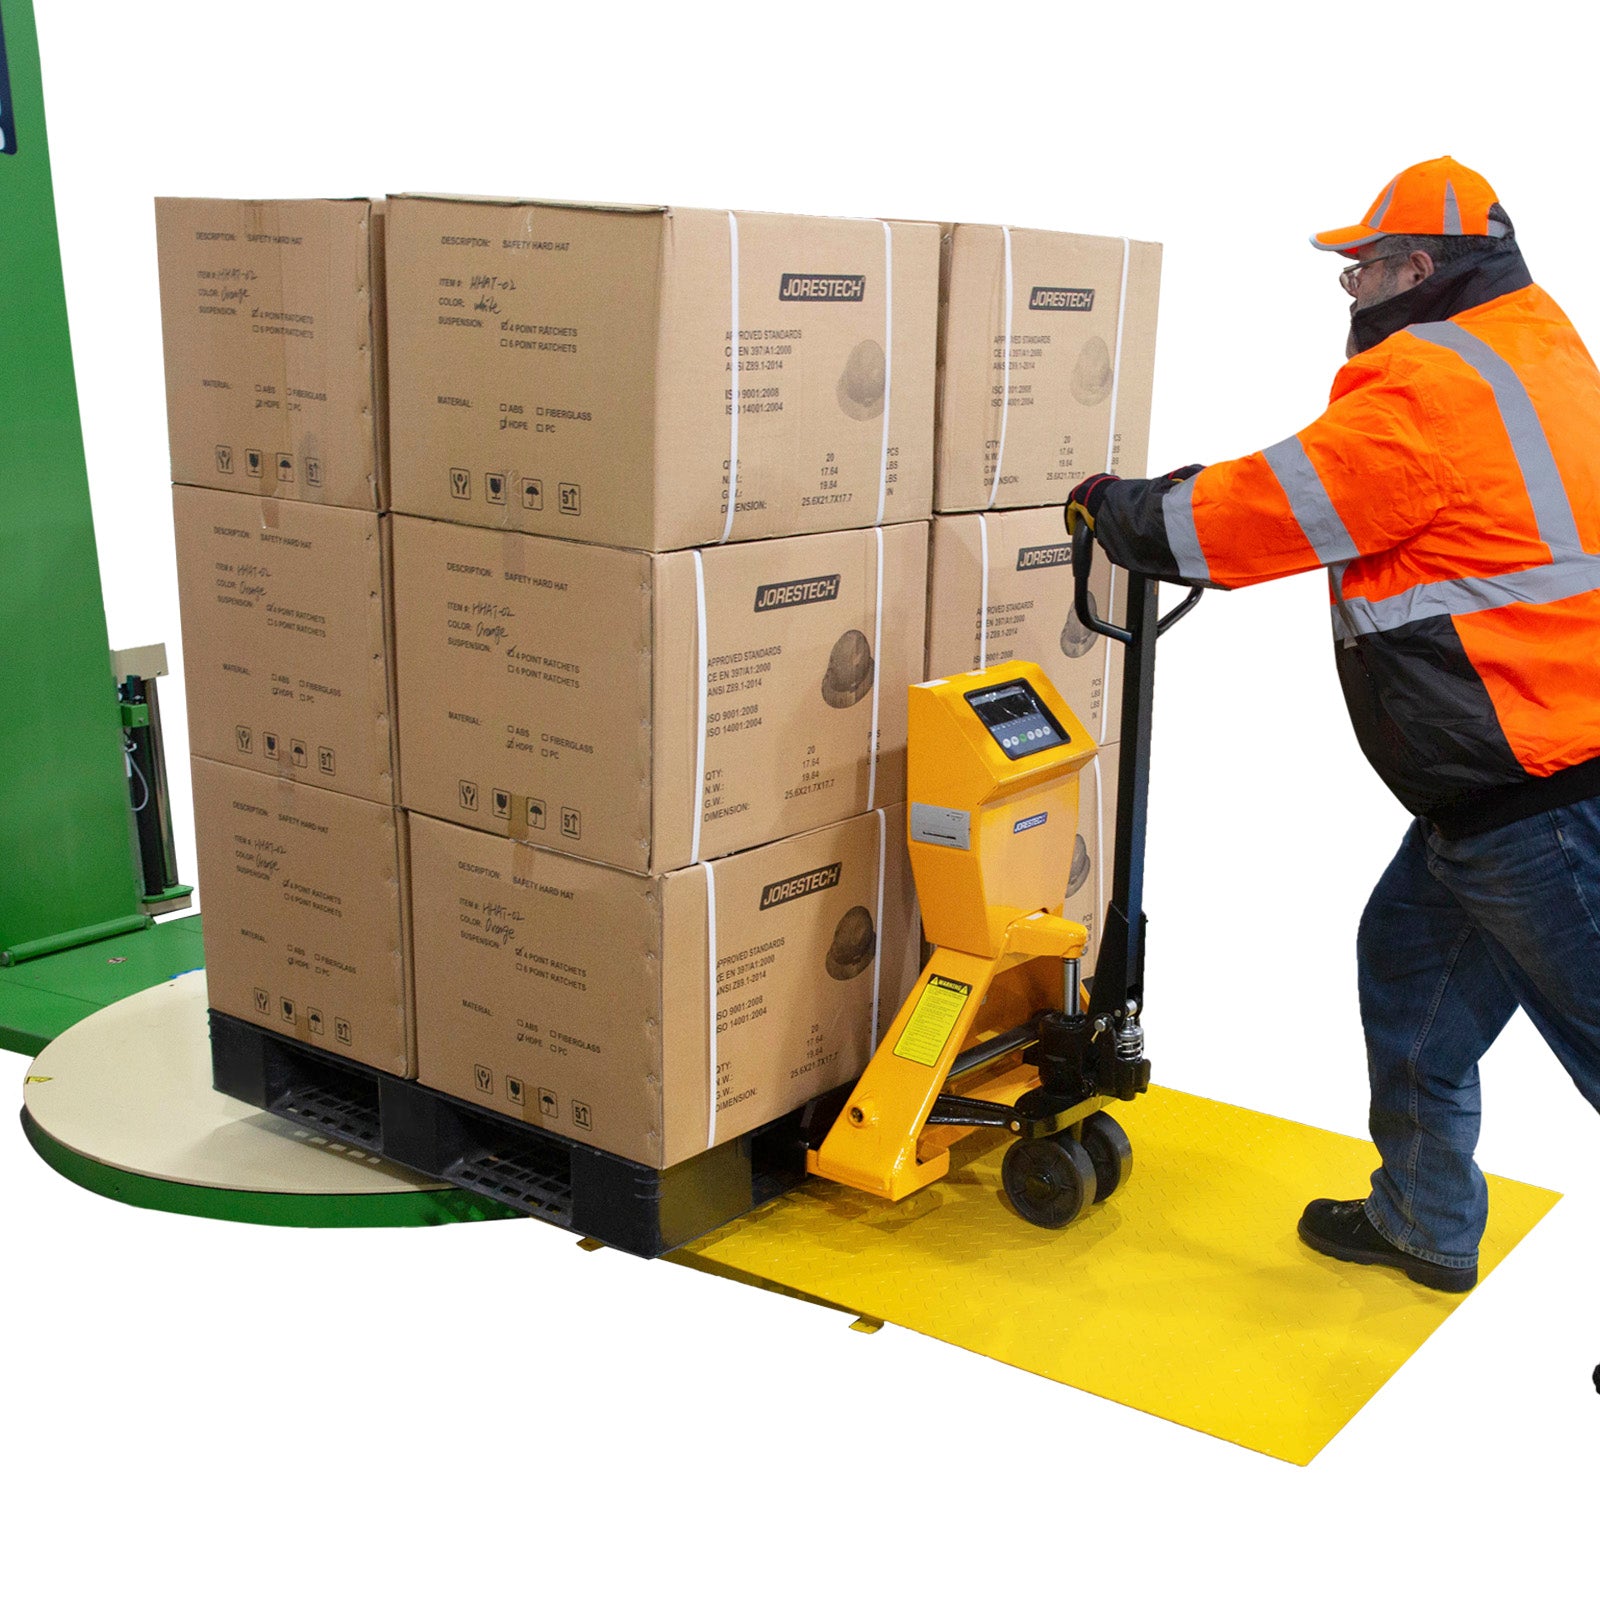 Man with a high-vis orange safety jacket setting down a pallet loaded with boxes on the pallet jack's turntable. He is stepping on the loading ramp and part of the pallet jack is rolling off the loading ramp as well.